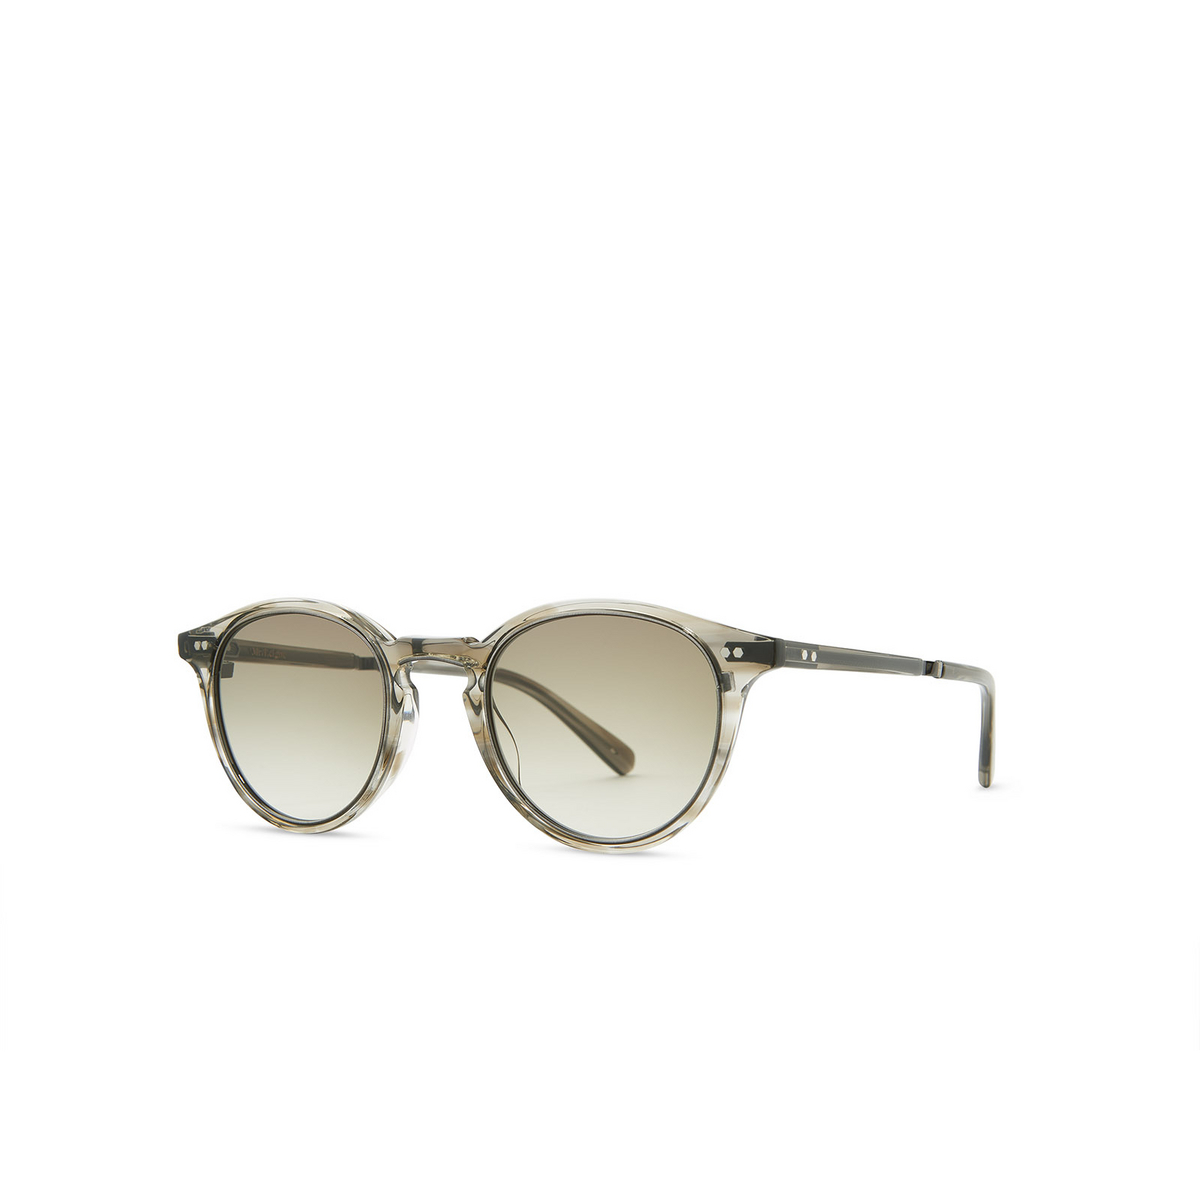 Mr. Leight MARMONT II S Sunglasses CSTGRY-PW/FERNG Celestial Grey-Pewter - three-quarters view